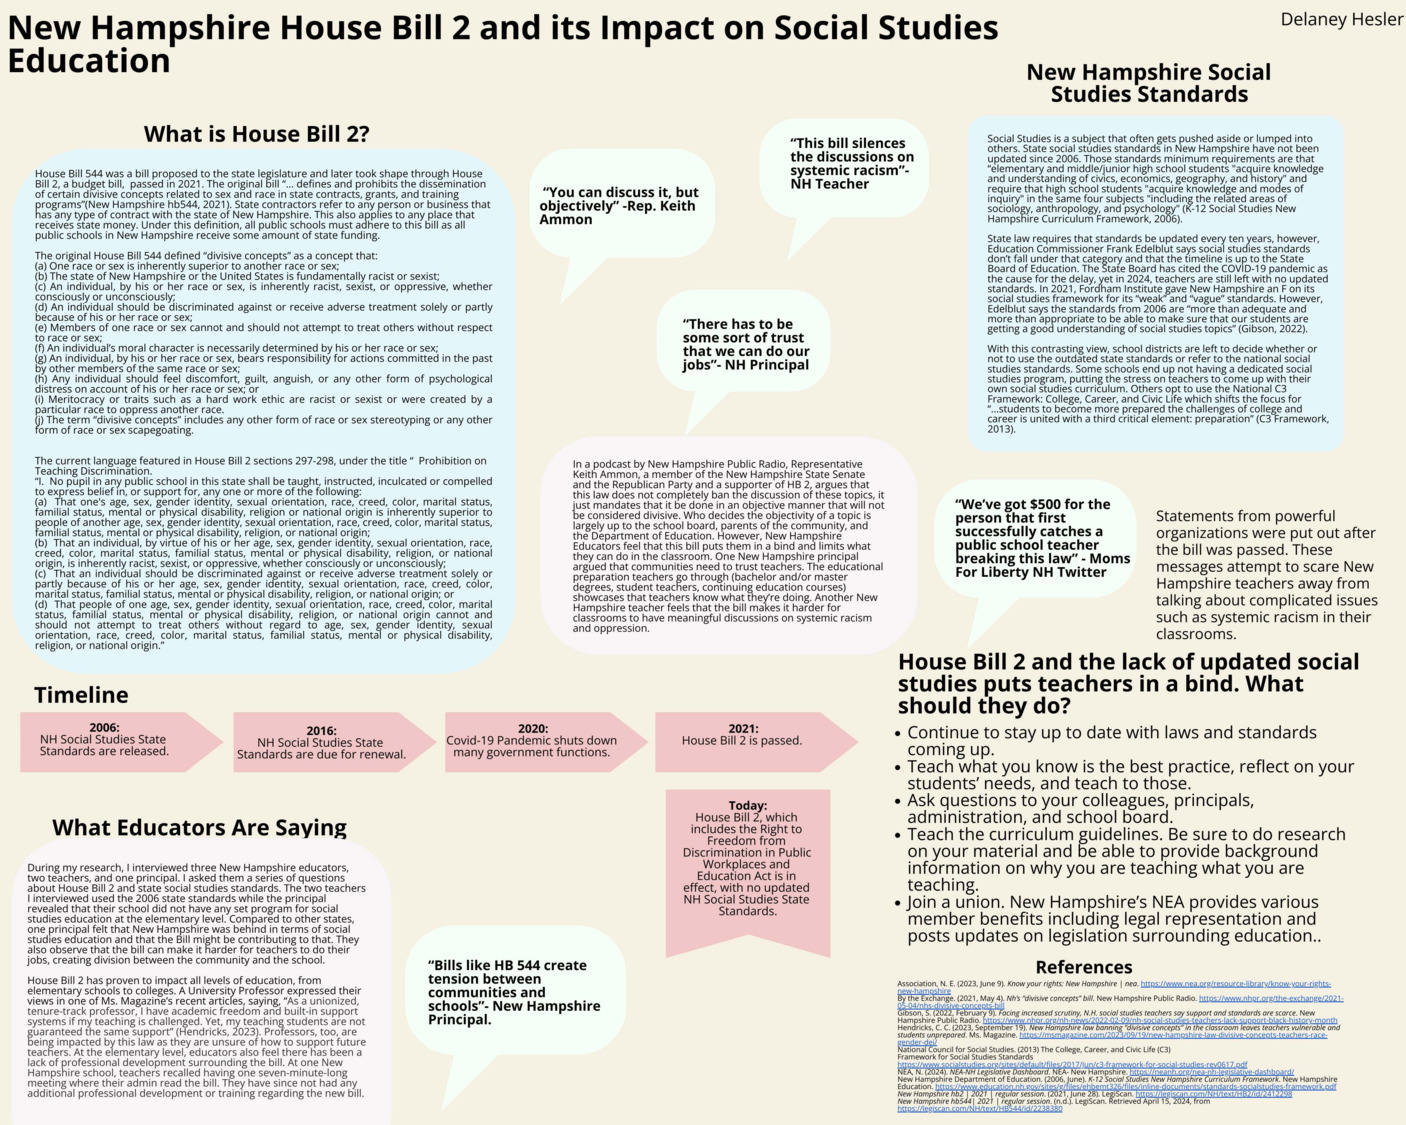 House Bill 2 And The Impact On Social Studies Education by delaneyhesler